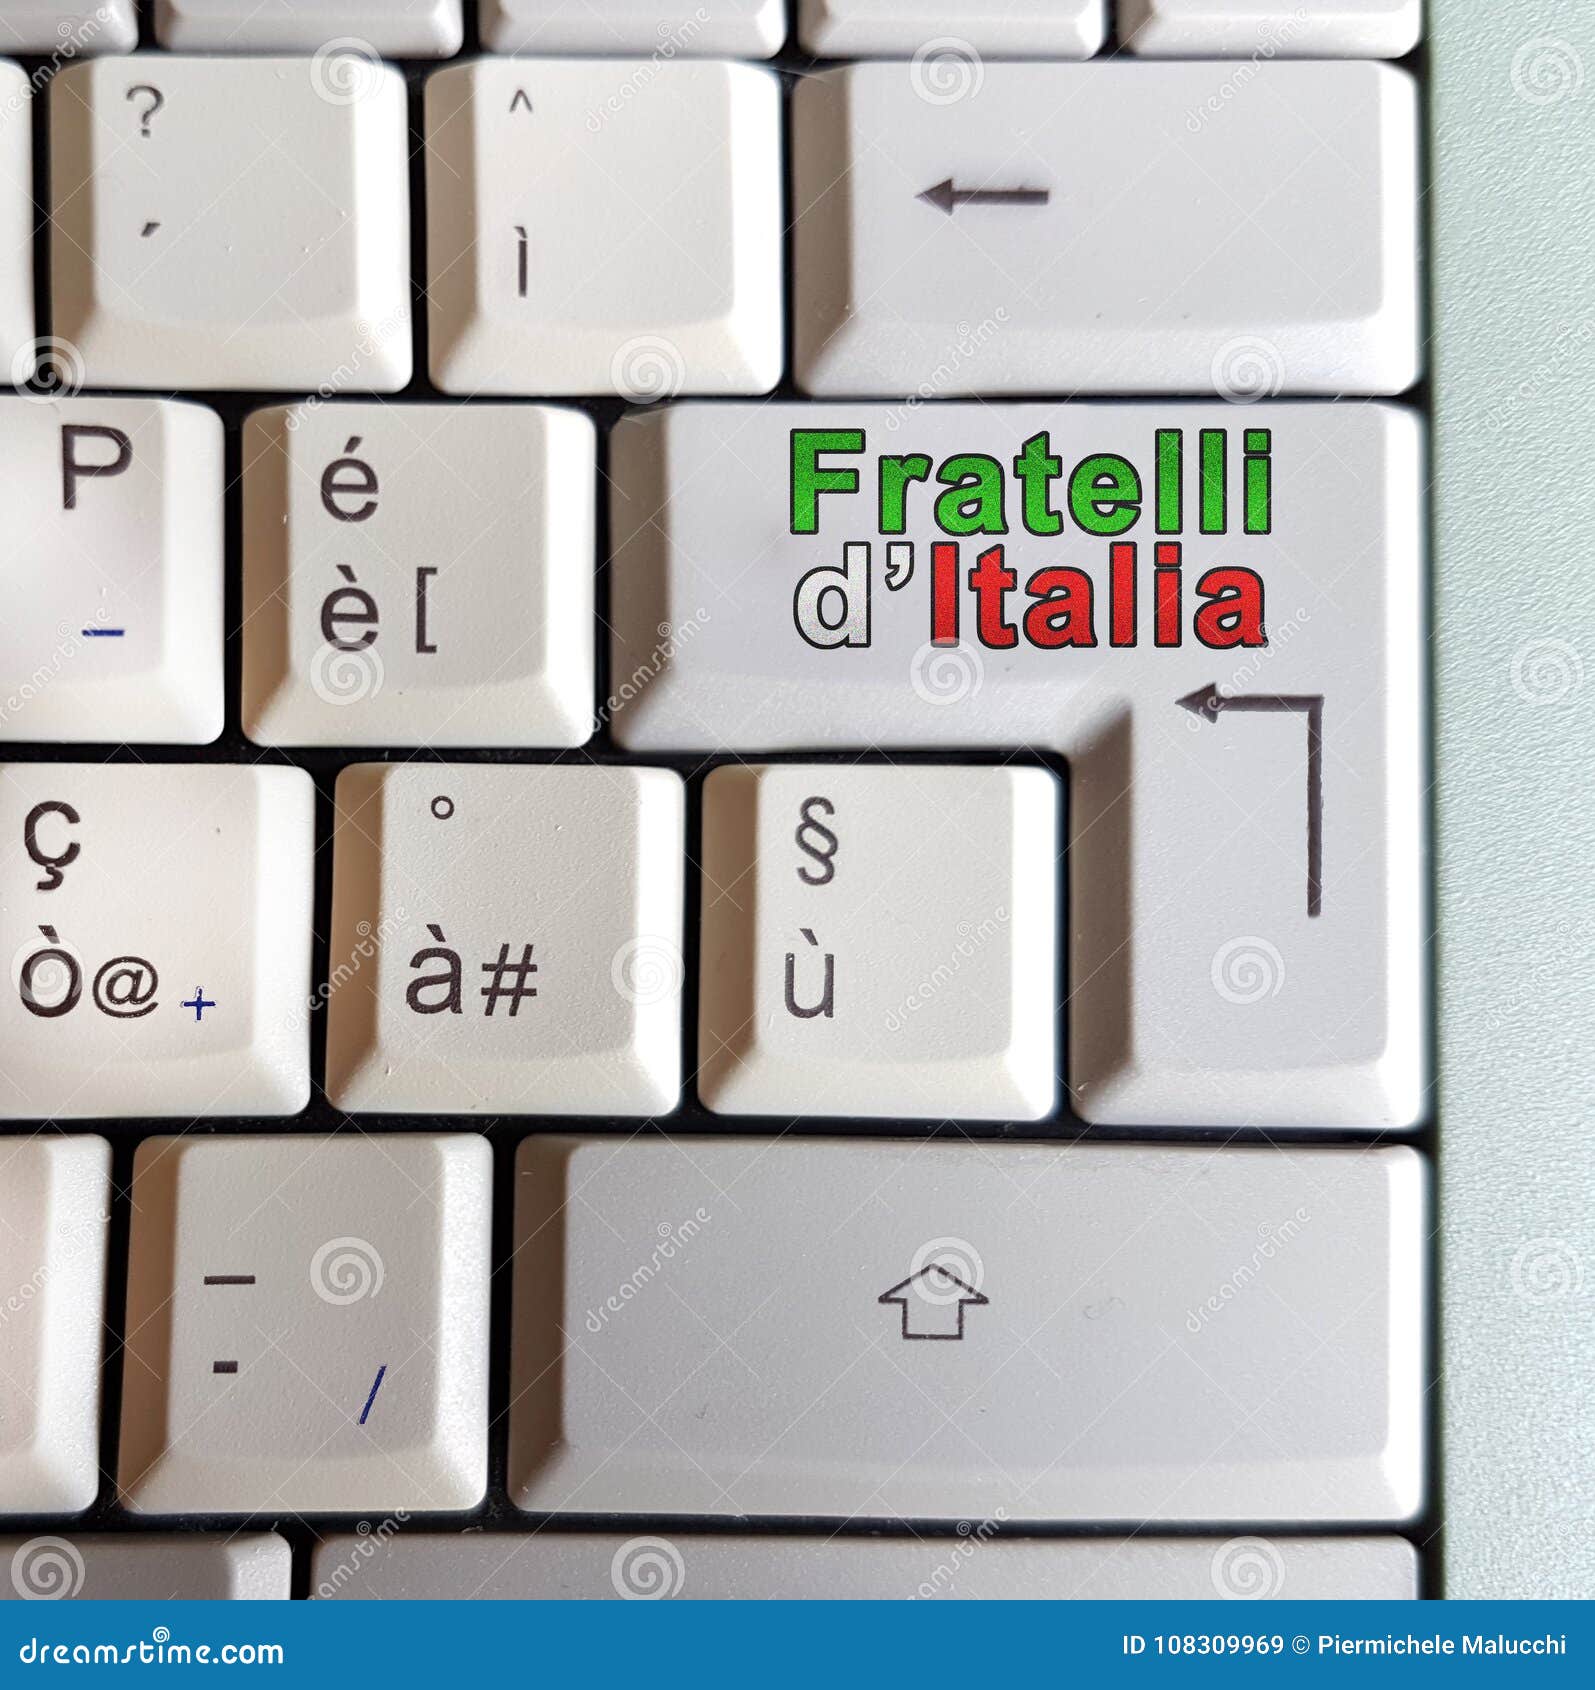 with the keyboard vote for the next elections in italy, vote fra